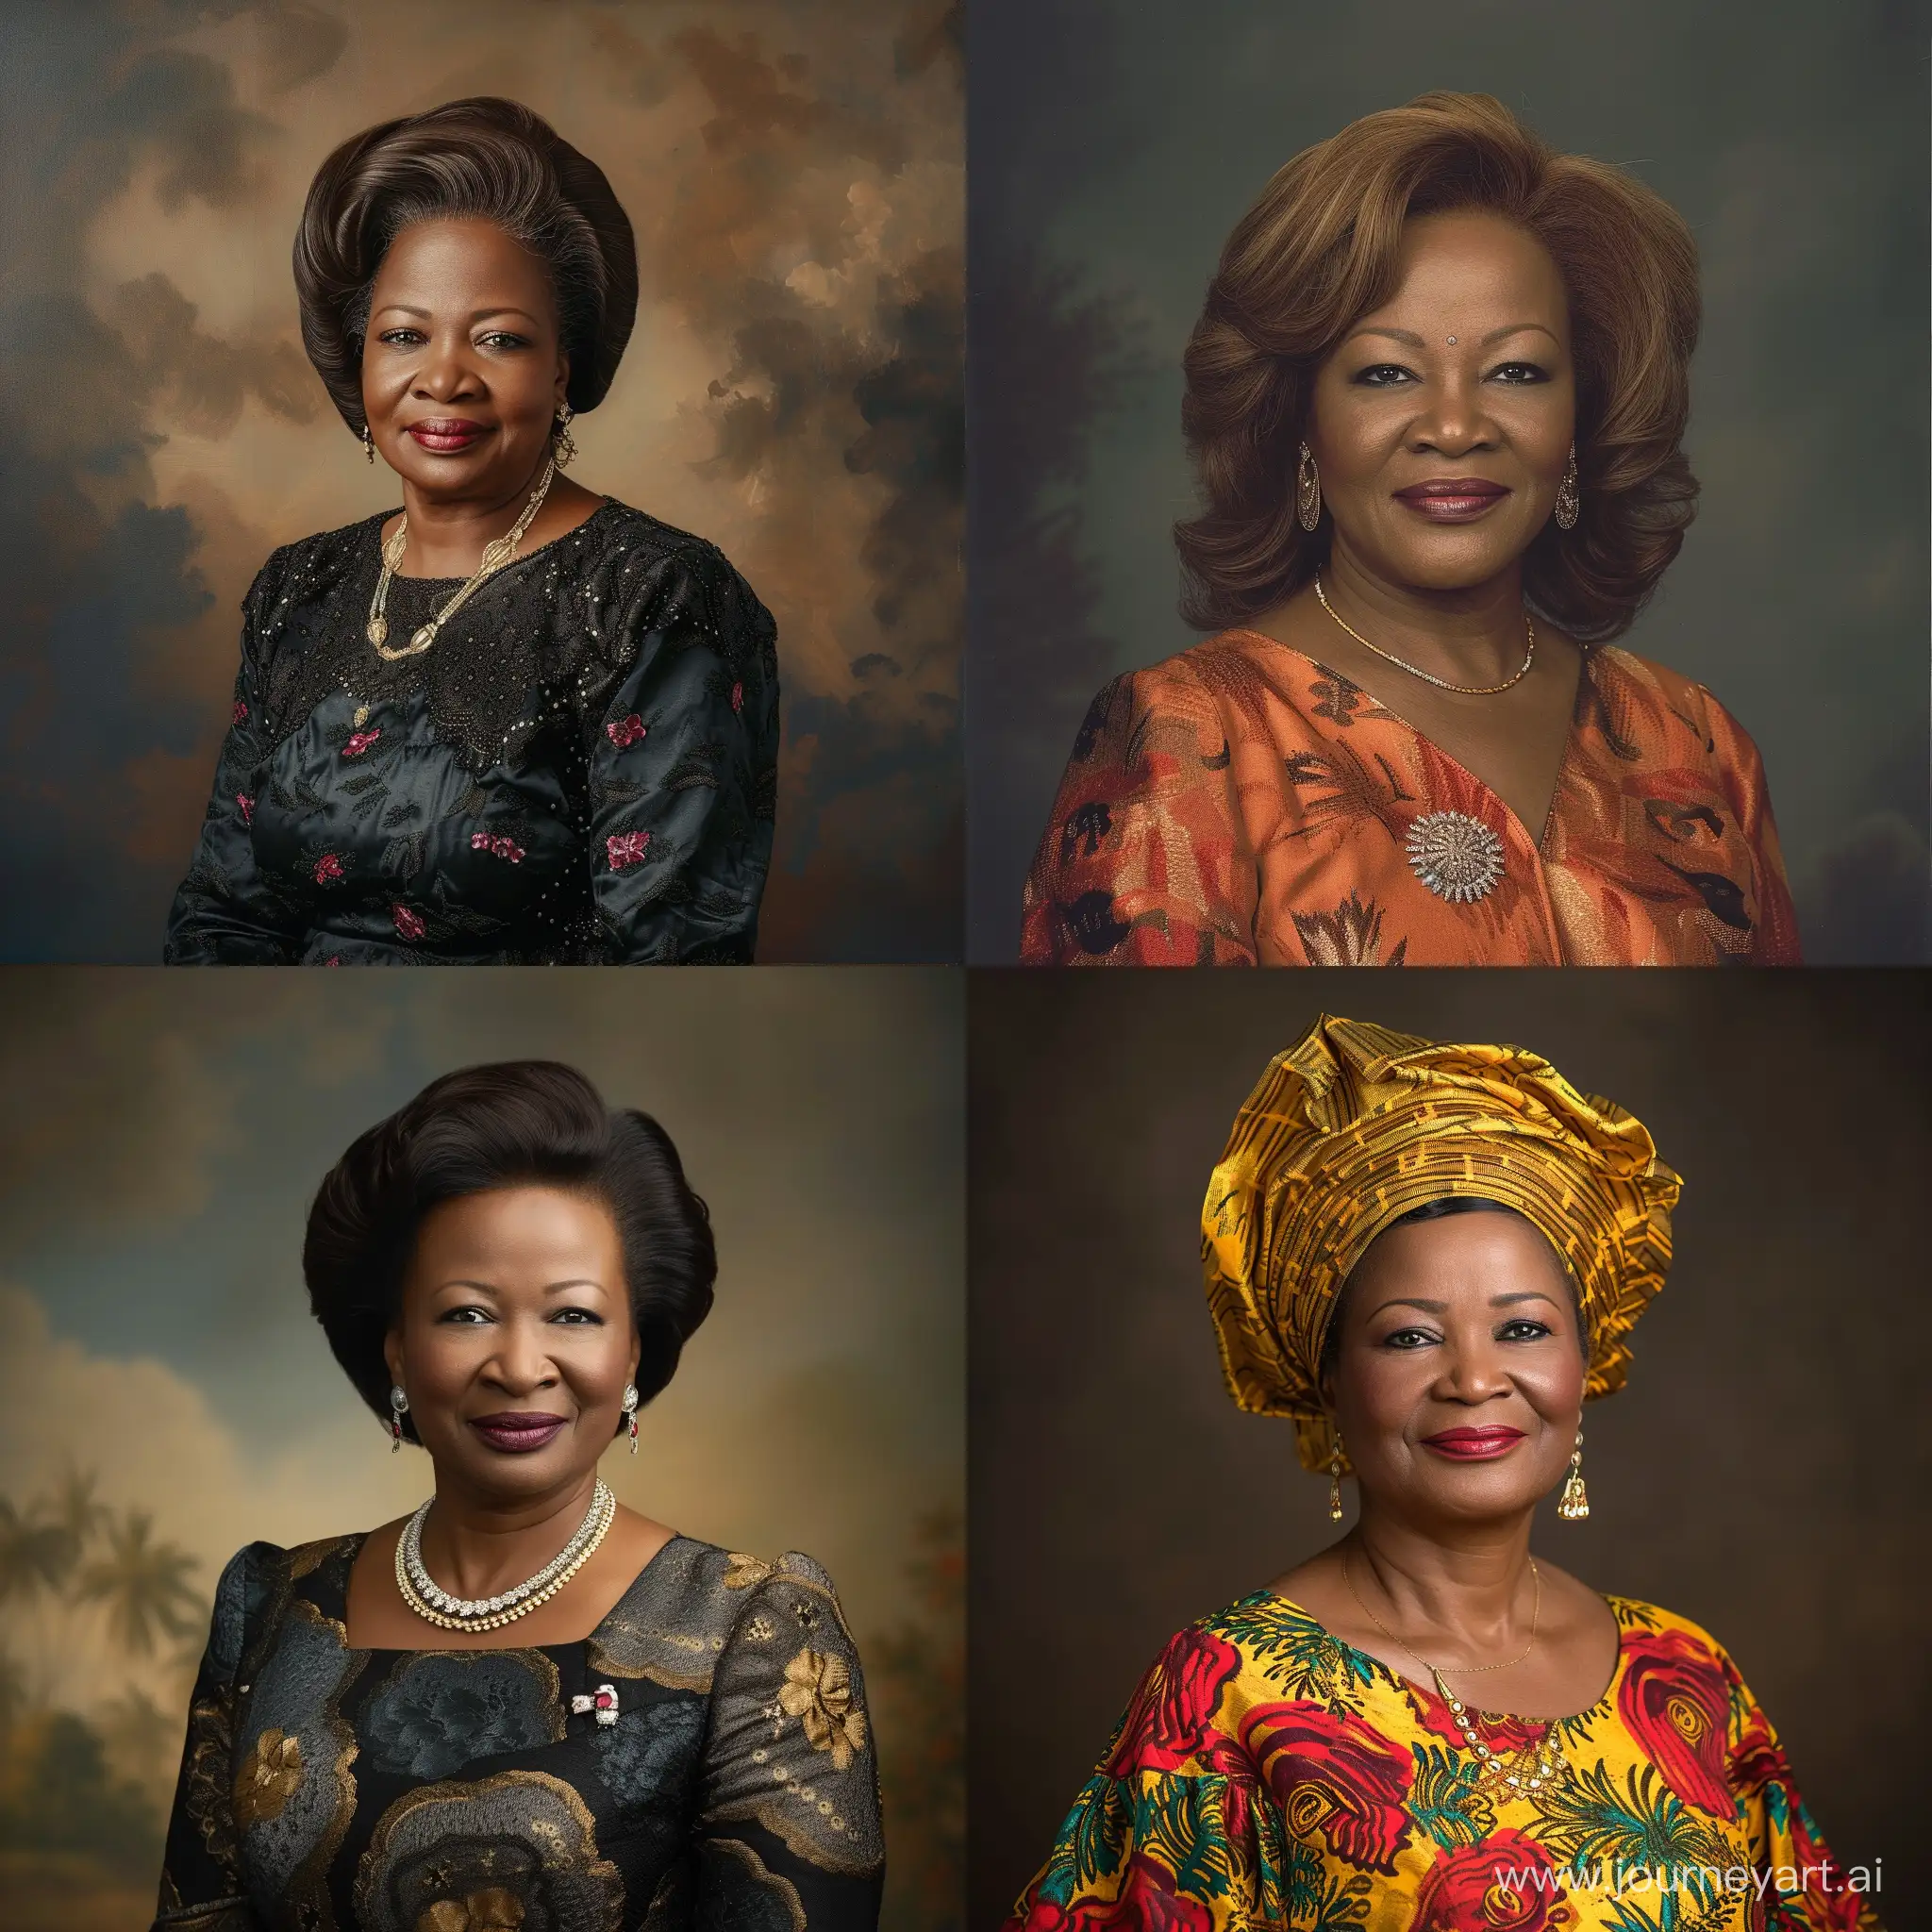 Generate a professional portrait picture of  chantal biya the wife of the president of cameroon